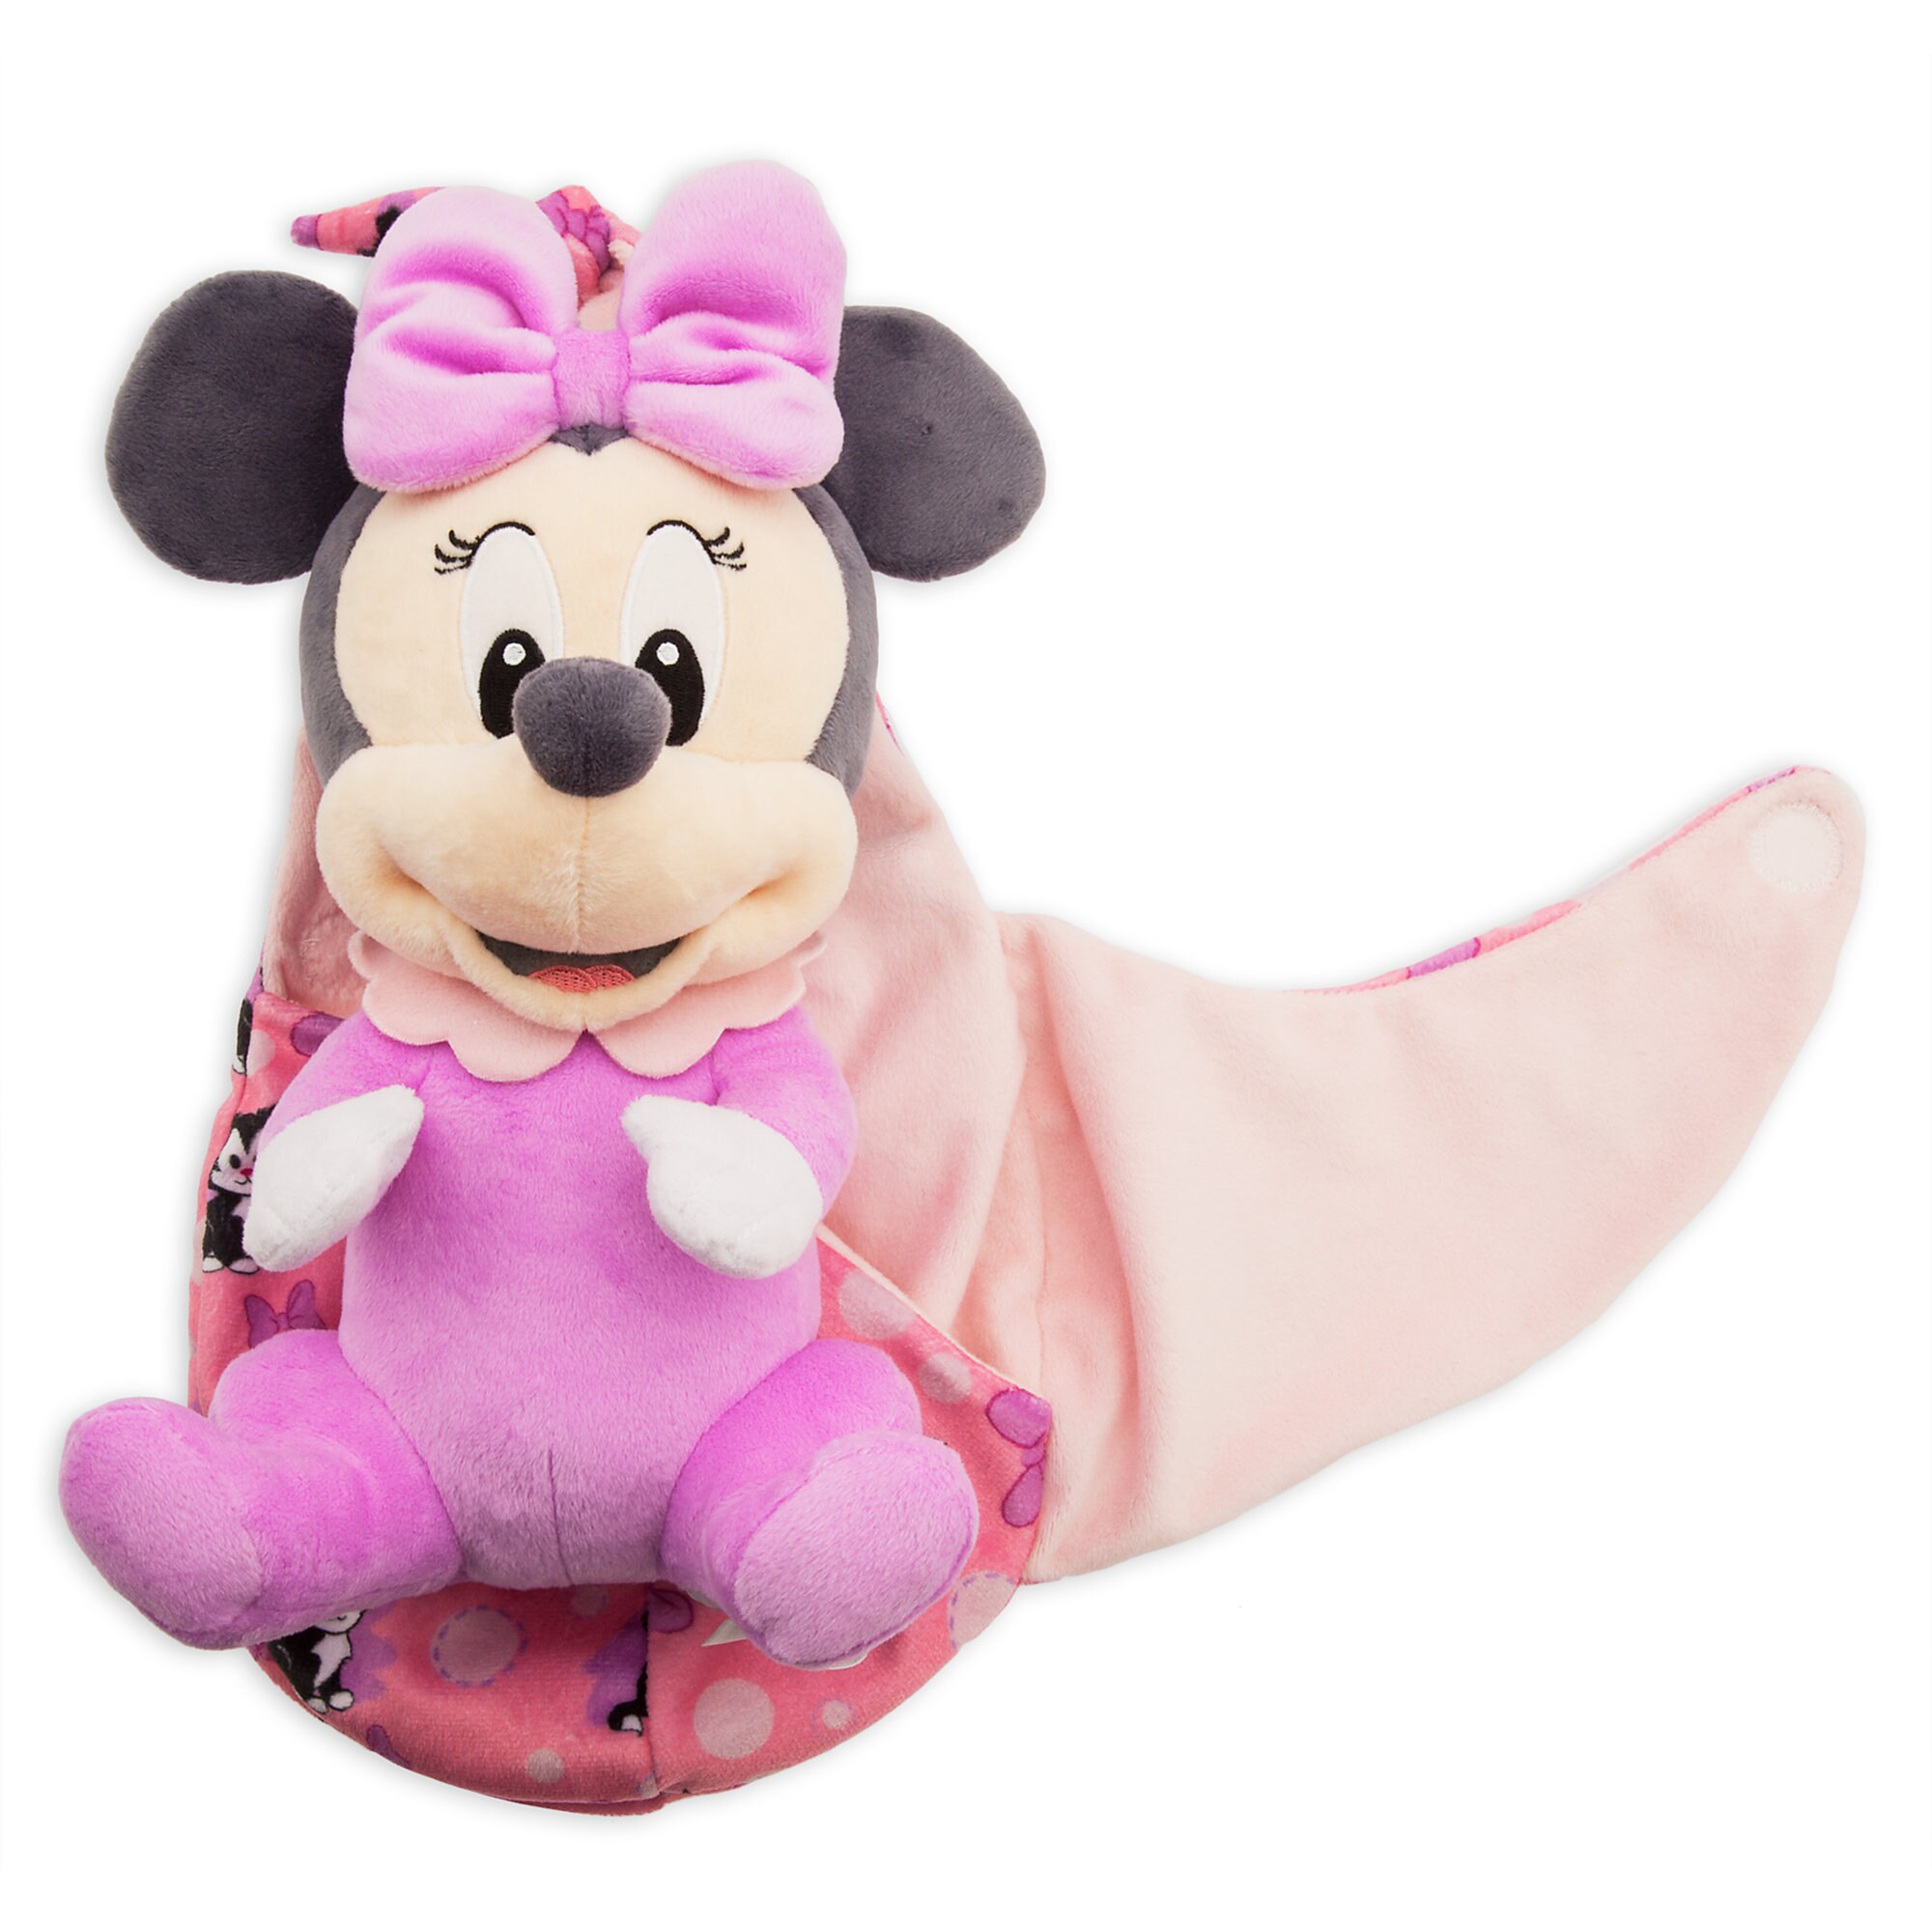 Minnie Mouse Plush in Pouch - Disney Babies - Small